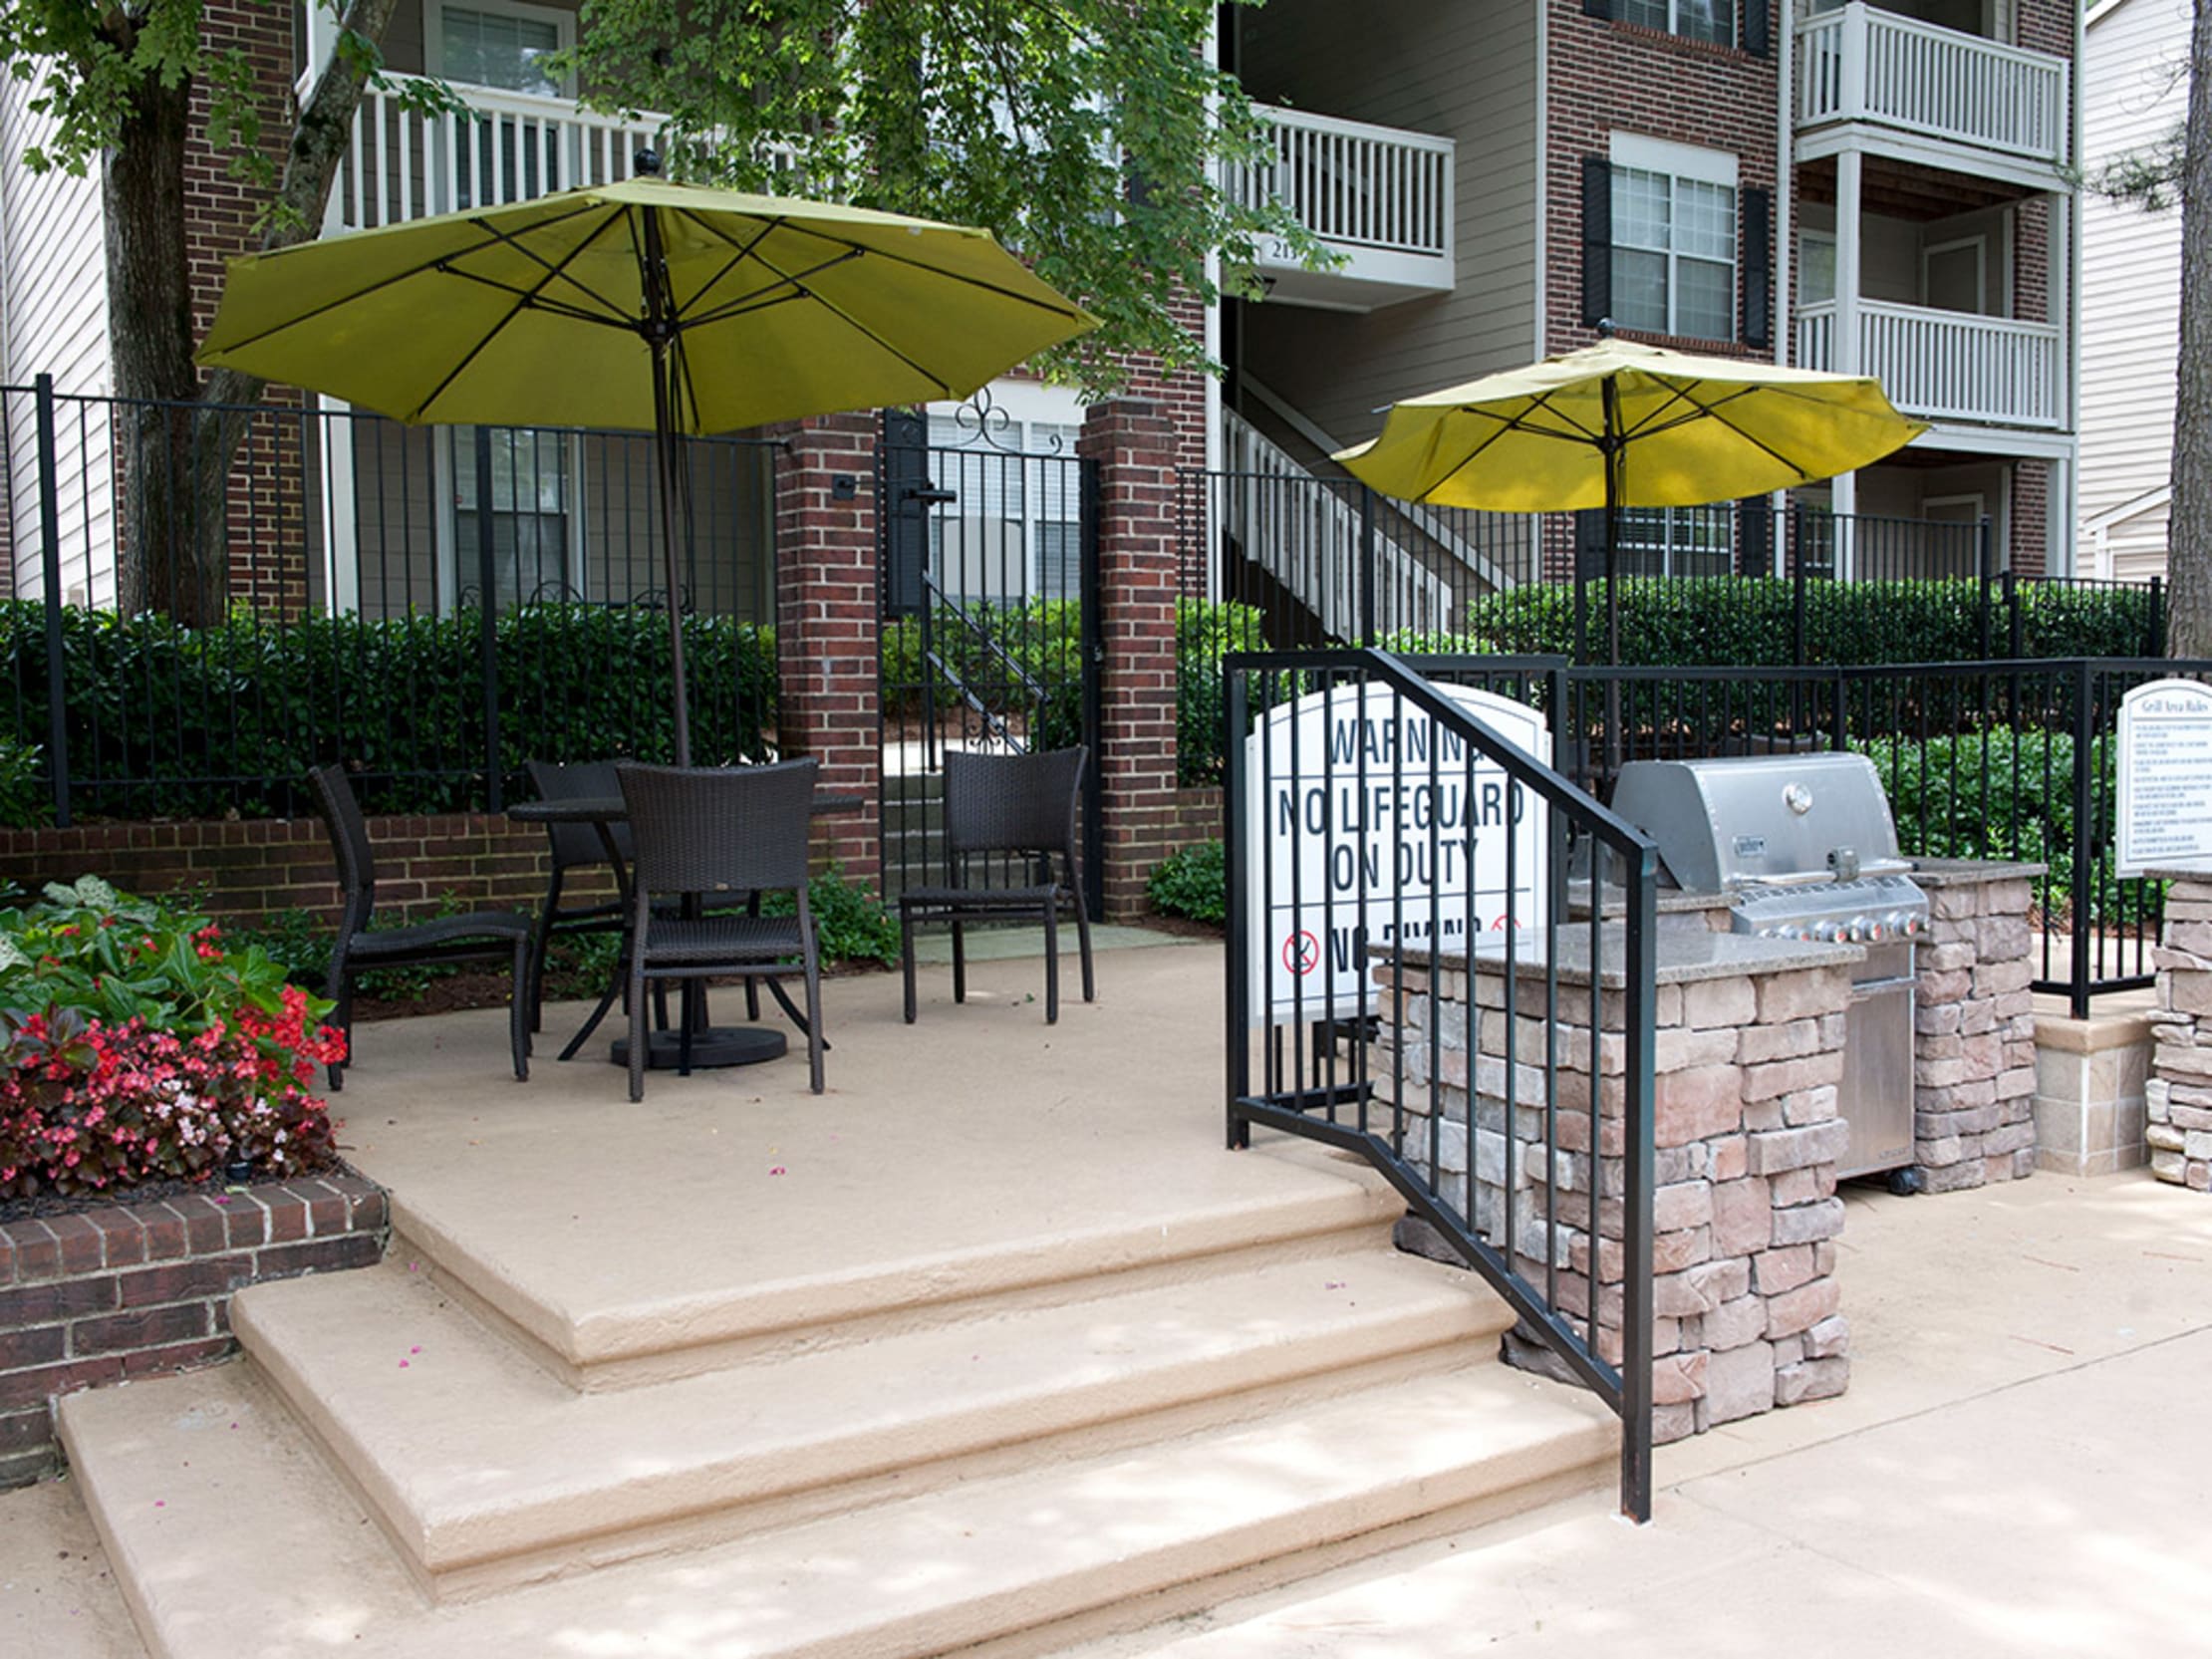 Outdoor grilling station and patio tables with umbrellas at Castlegate Collier Hills in Atlanta, Georgia